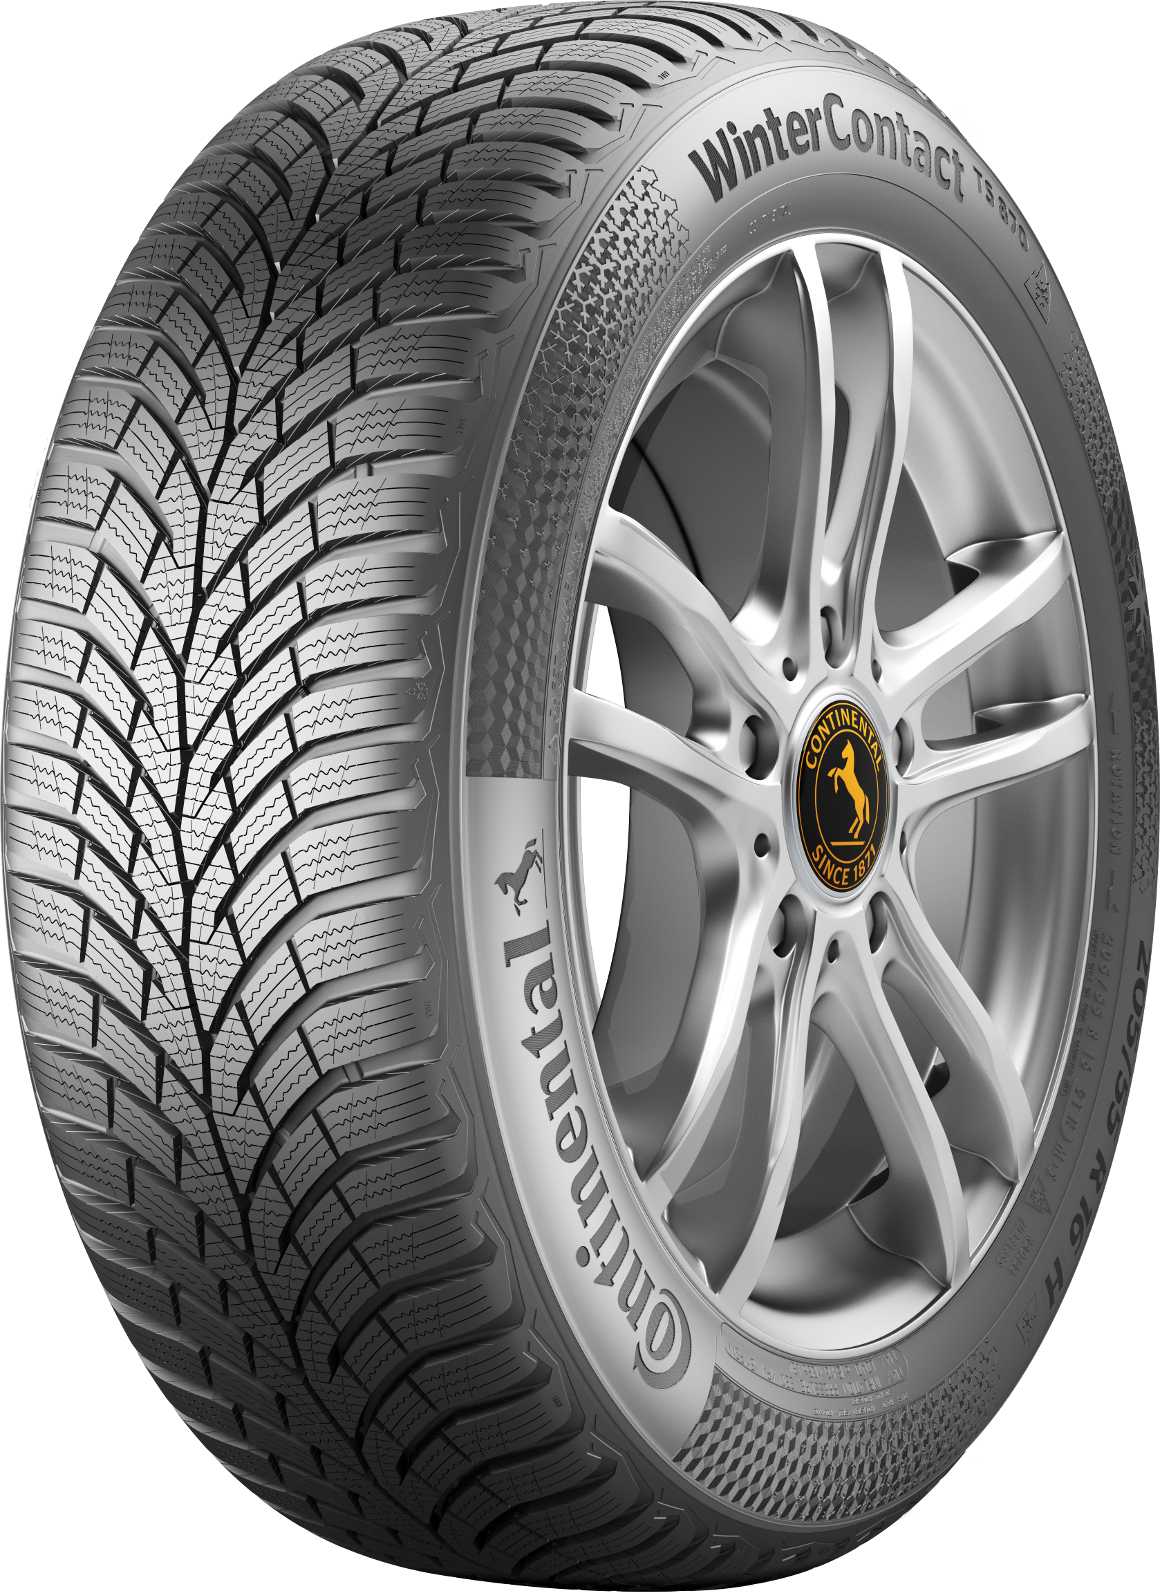    Continental Winter Contact TS870 225/45 R17 